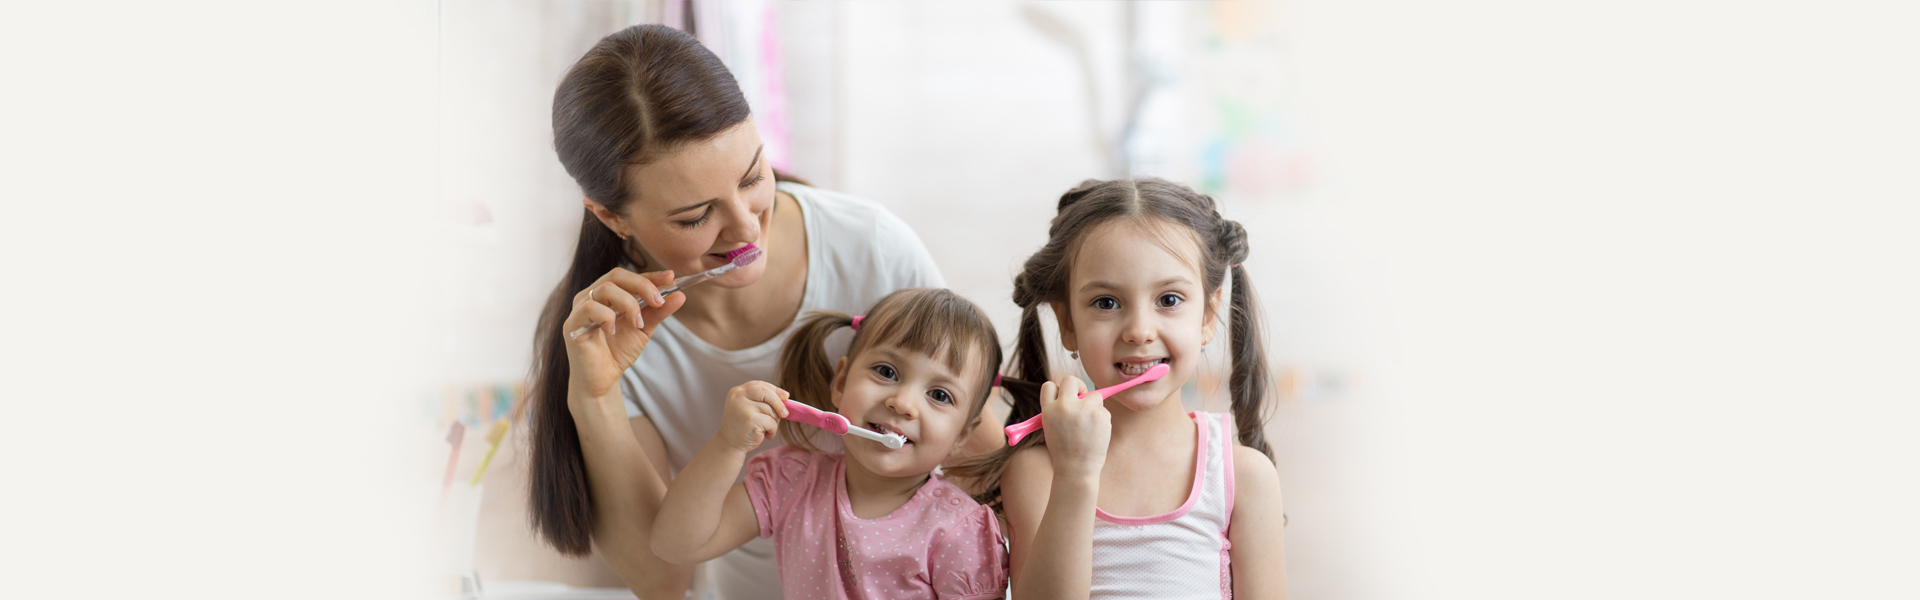 Three Key Child Dental Care Tips To Help Secure Your Child’s Dental Health